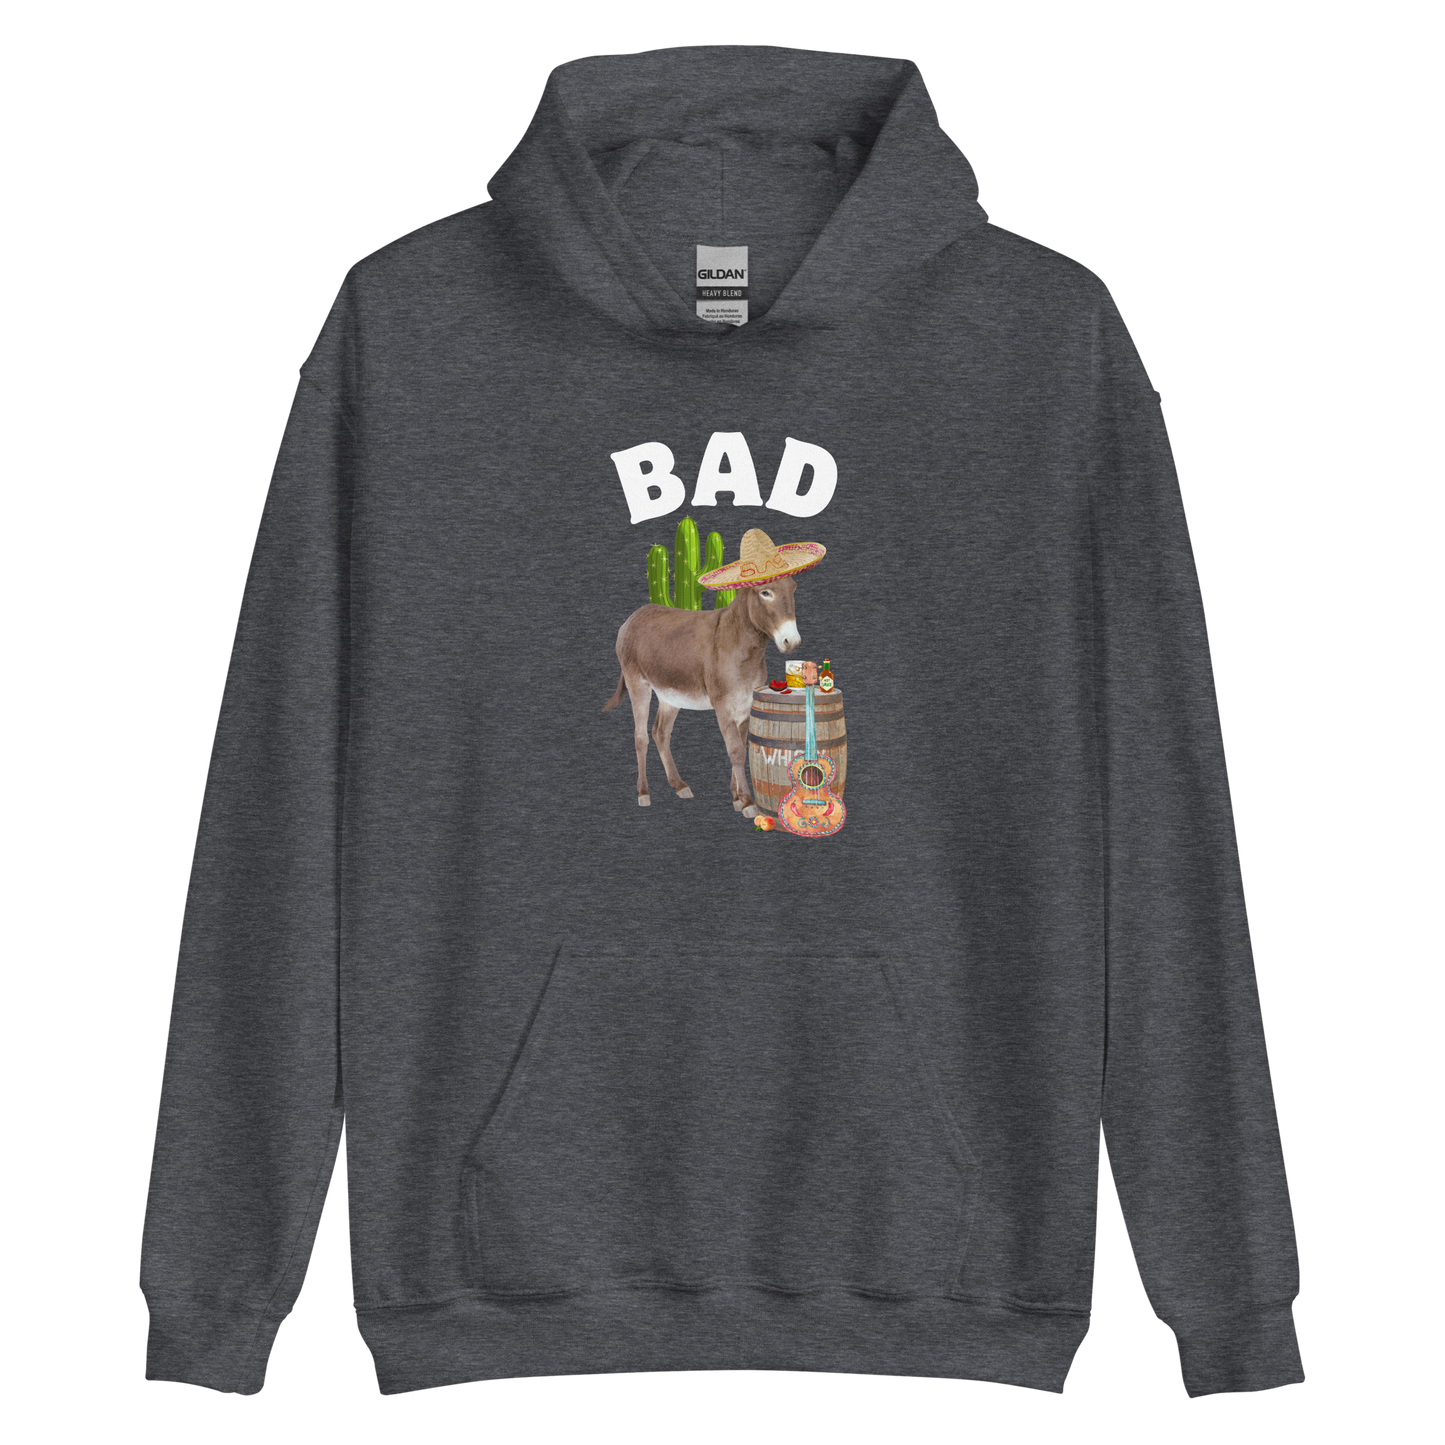 Dark Heather Donkey Hoodie Featuring a Funny Bad Ass Donkey graphic on the chest - Funny Graphic Bad Ass Donkey Hoodies - Boozy Fox